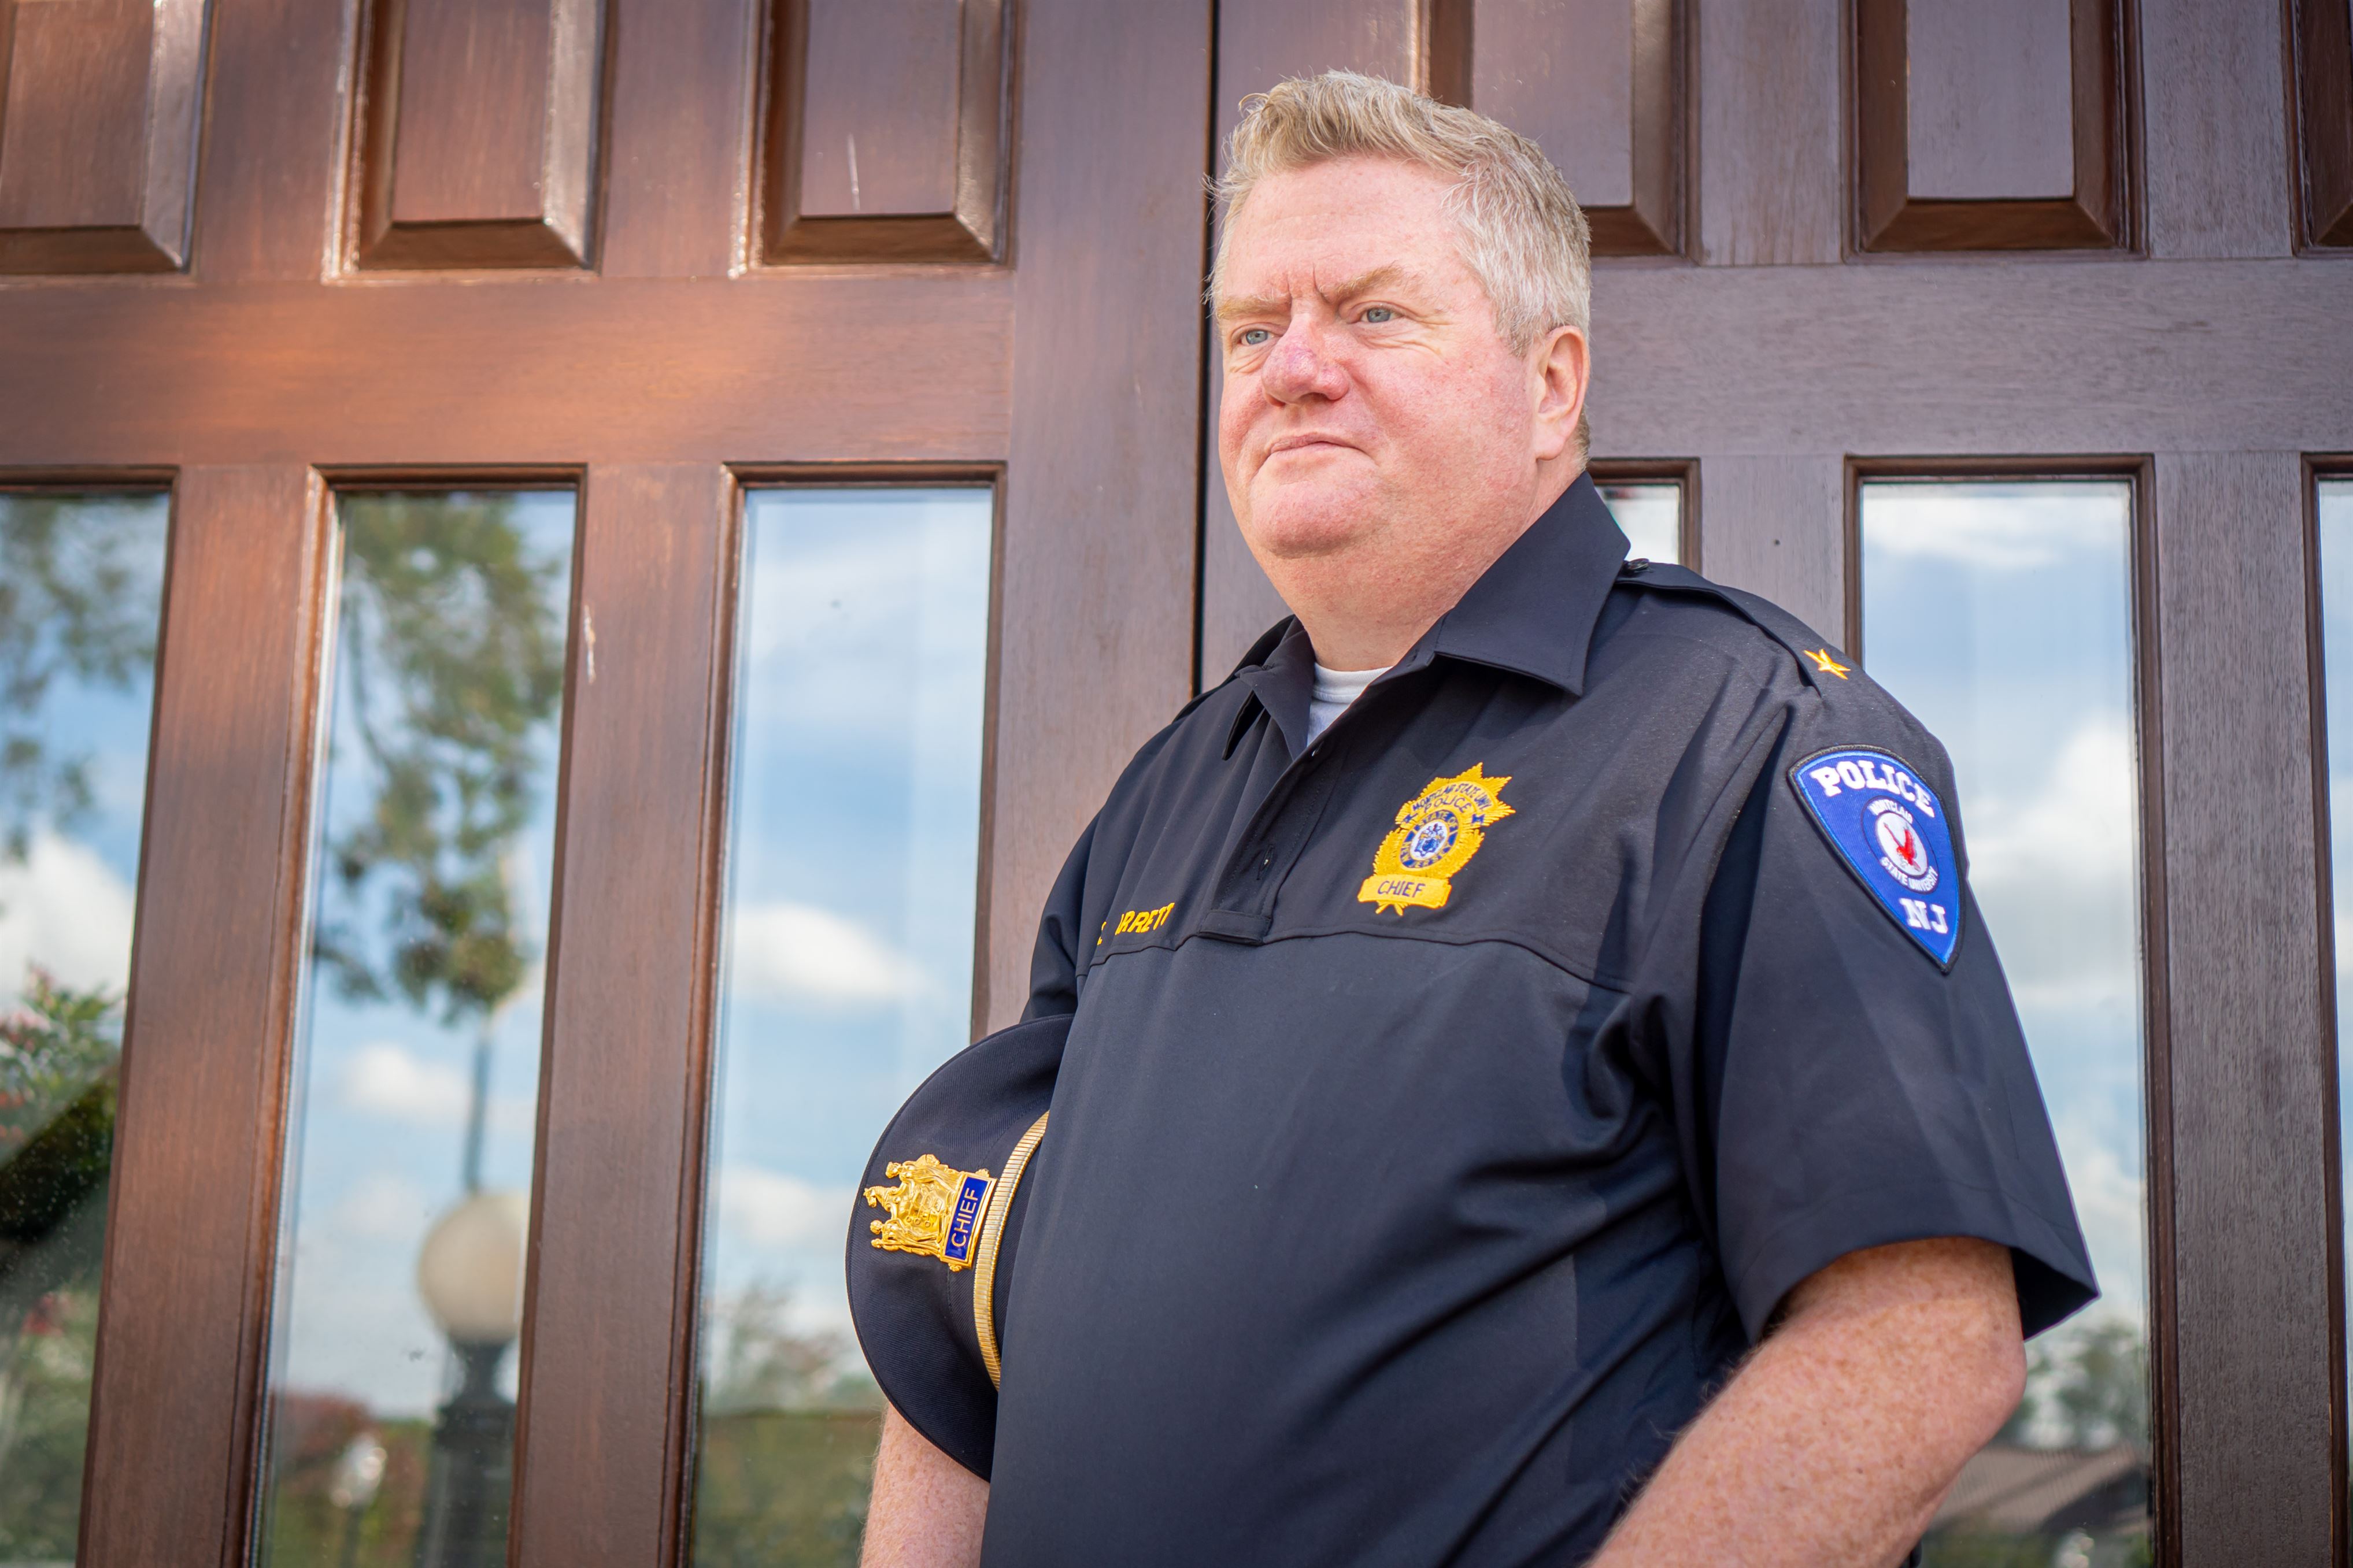 Kieran Barrett has been promoted from captain to chief of police of the Montclair State University Police Department. Lynise Olivacce | The Montclarion